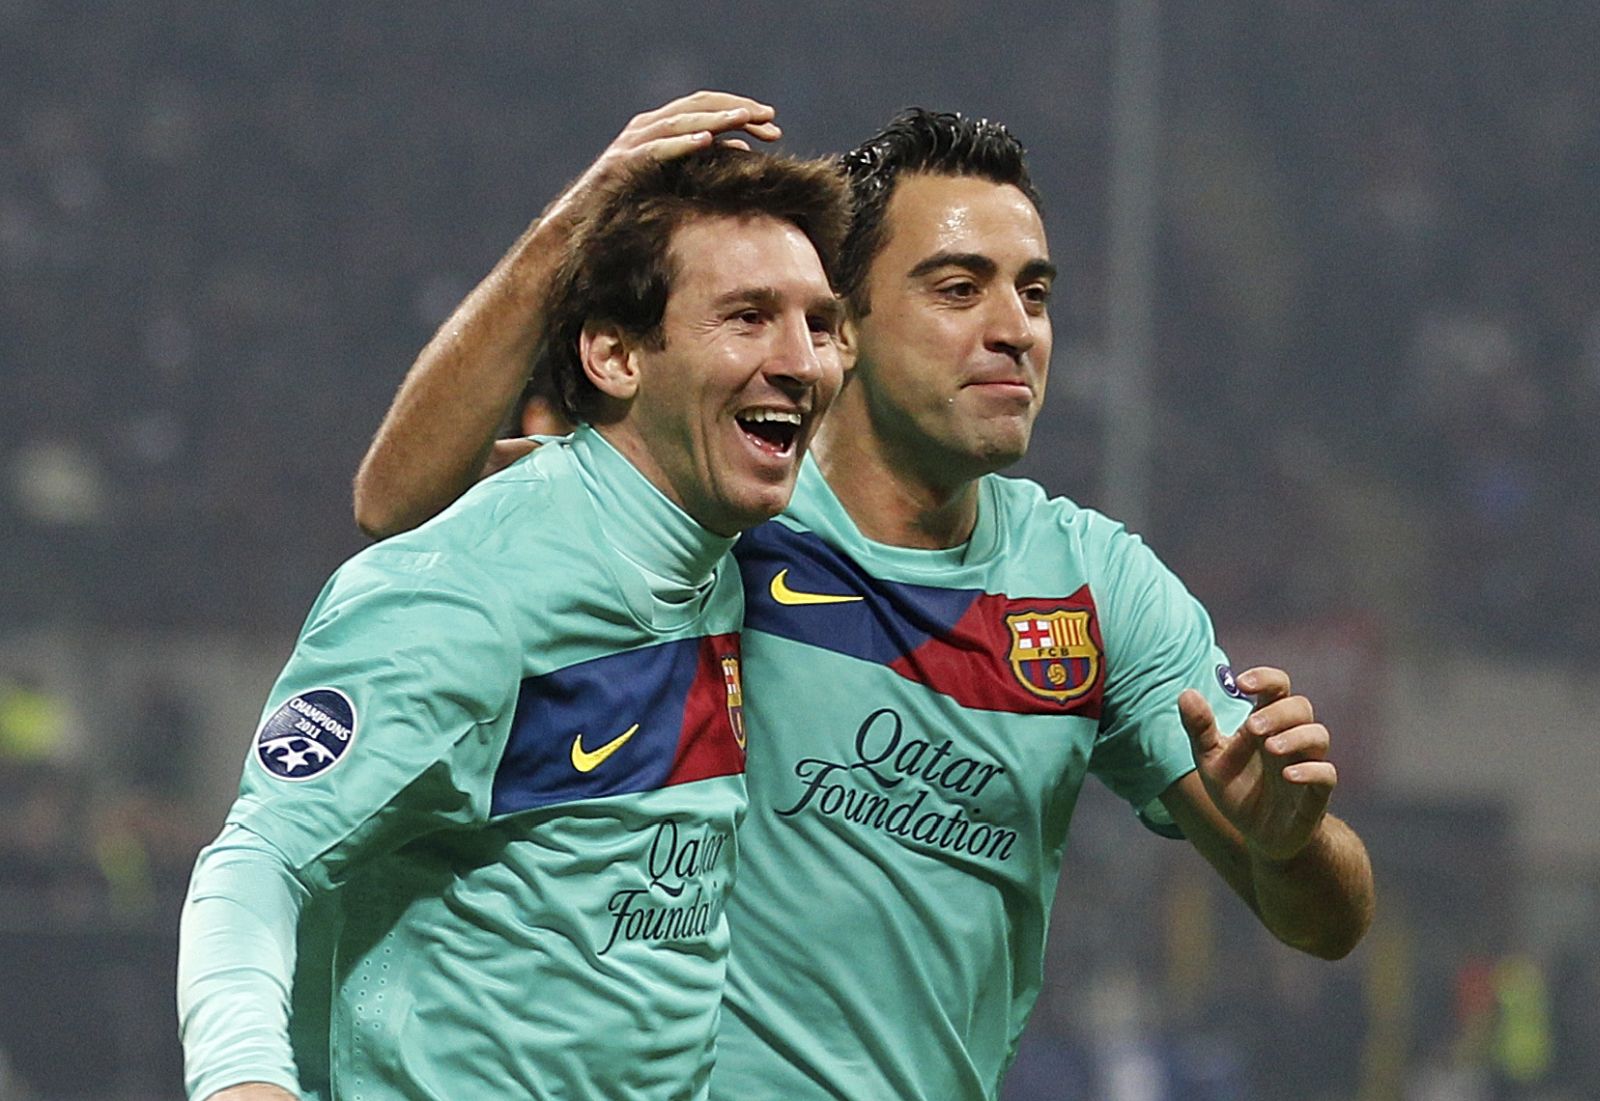 Barcelona forward Lionel Messi, of Argentina, left, celebrates with teammates midfielder Xavi Hernandez after an own goal of AC Milan midfielder Mark Van Bommel, during a Champions League, Group H soccer match between AC Milan and Barcelona at the San Siro stadium in Milan, Italy, Wednesday, Nov.23, 2011. (AP Photo/Luca Bruno)